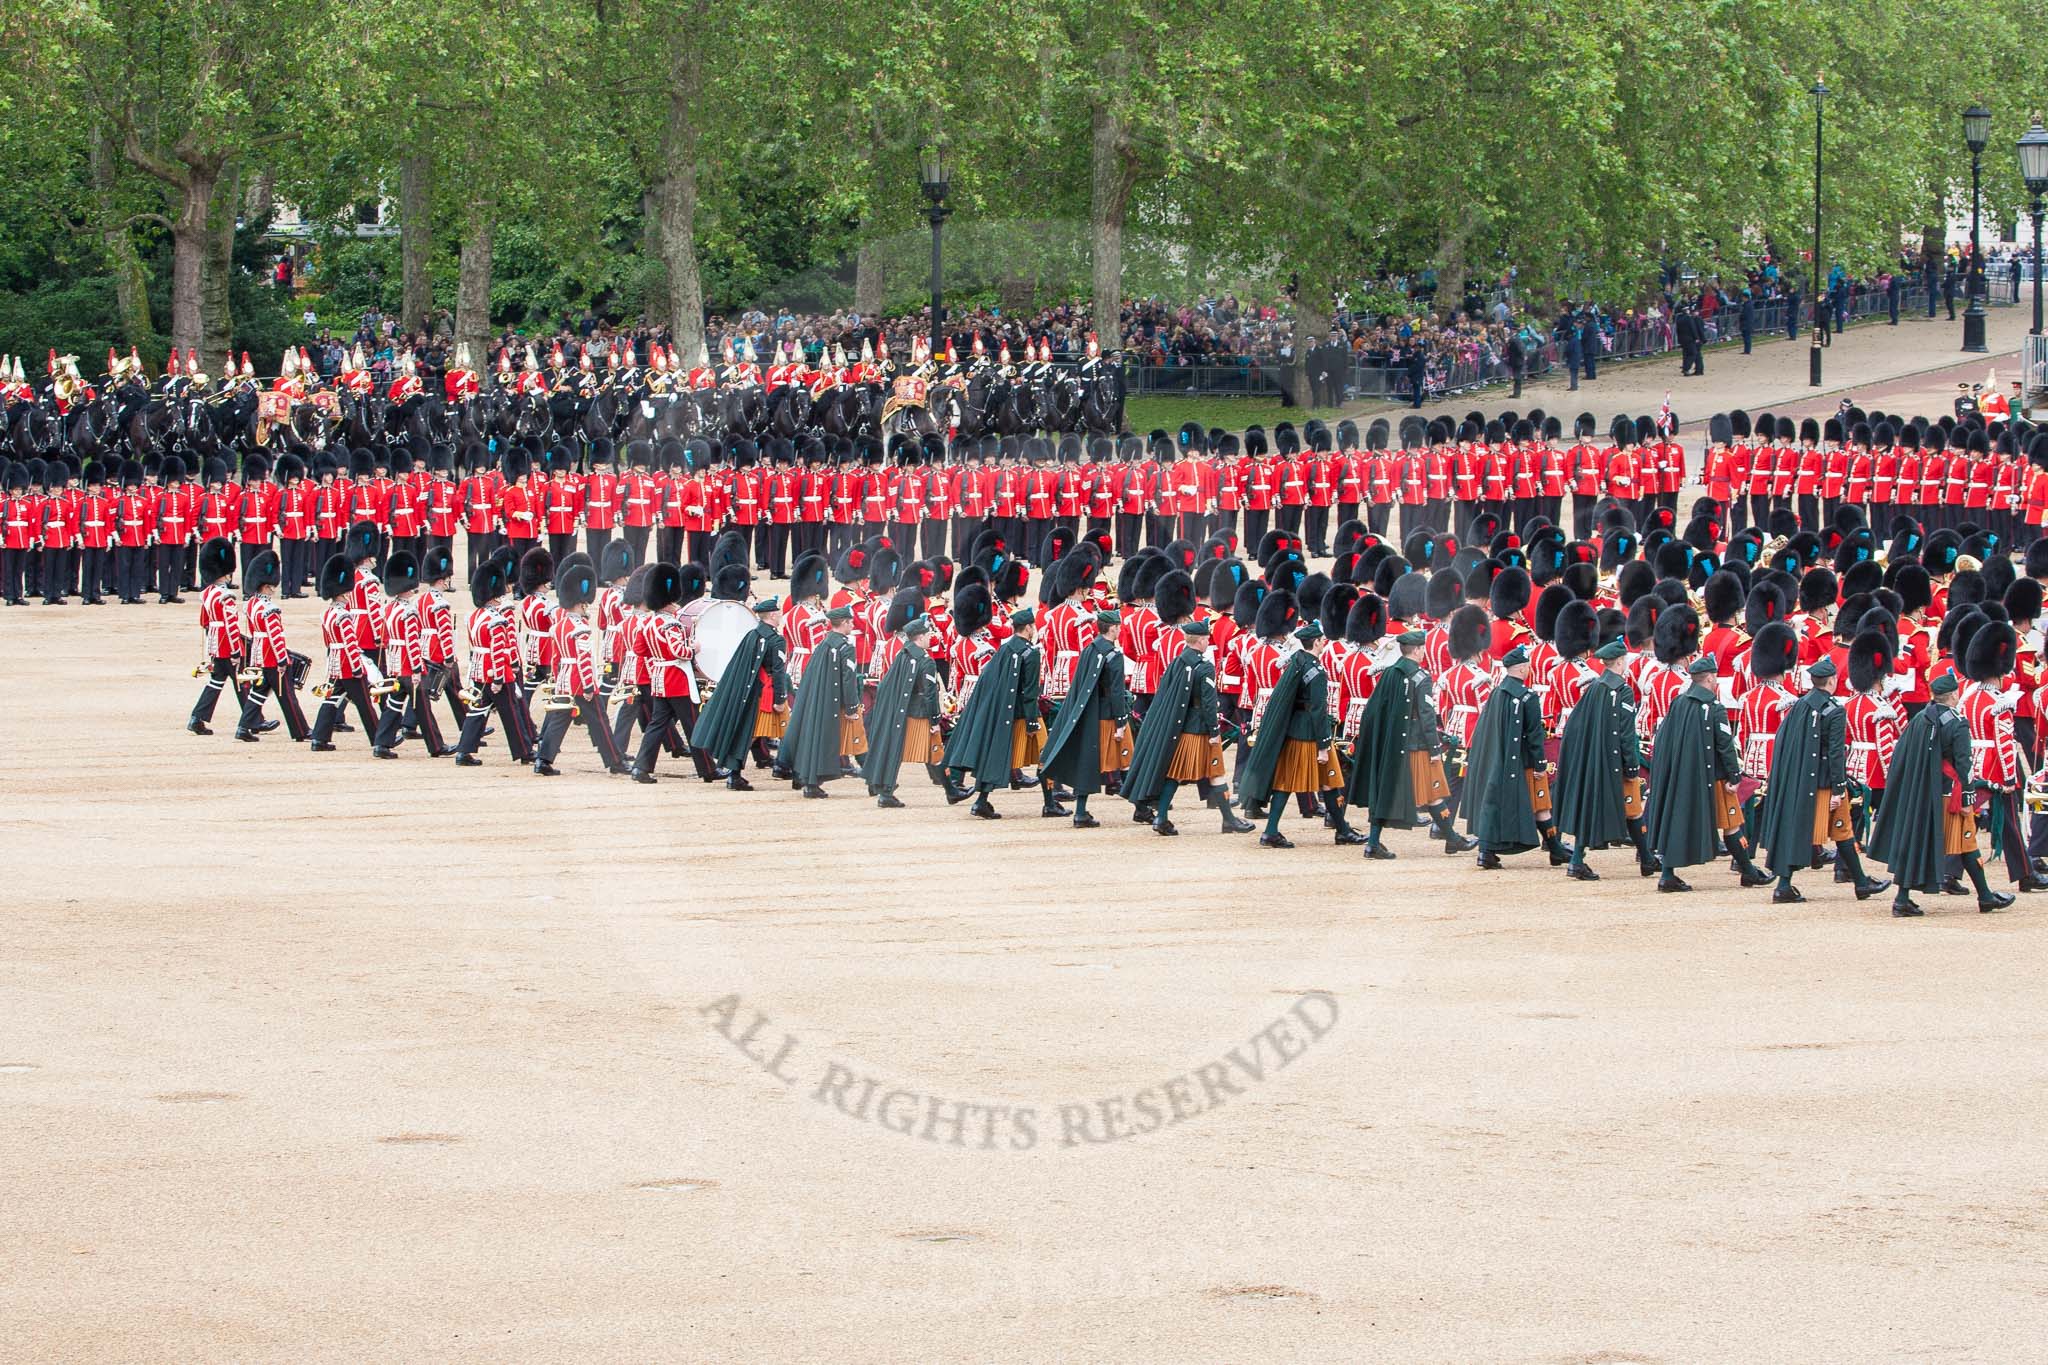 The Colonel's Review 2012: Massed Bands marching during the Massed Bands Troop..
Horse Guards Parade, Westminster,
London SW1,

United Kingdom,
on 09 June 2012 at 11:08, image #215